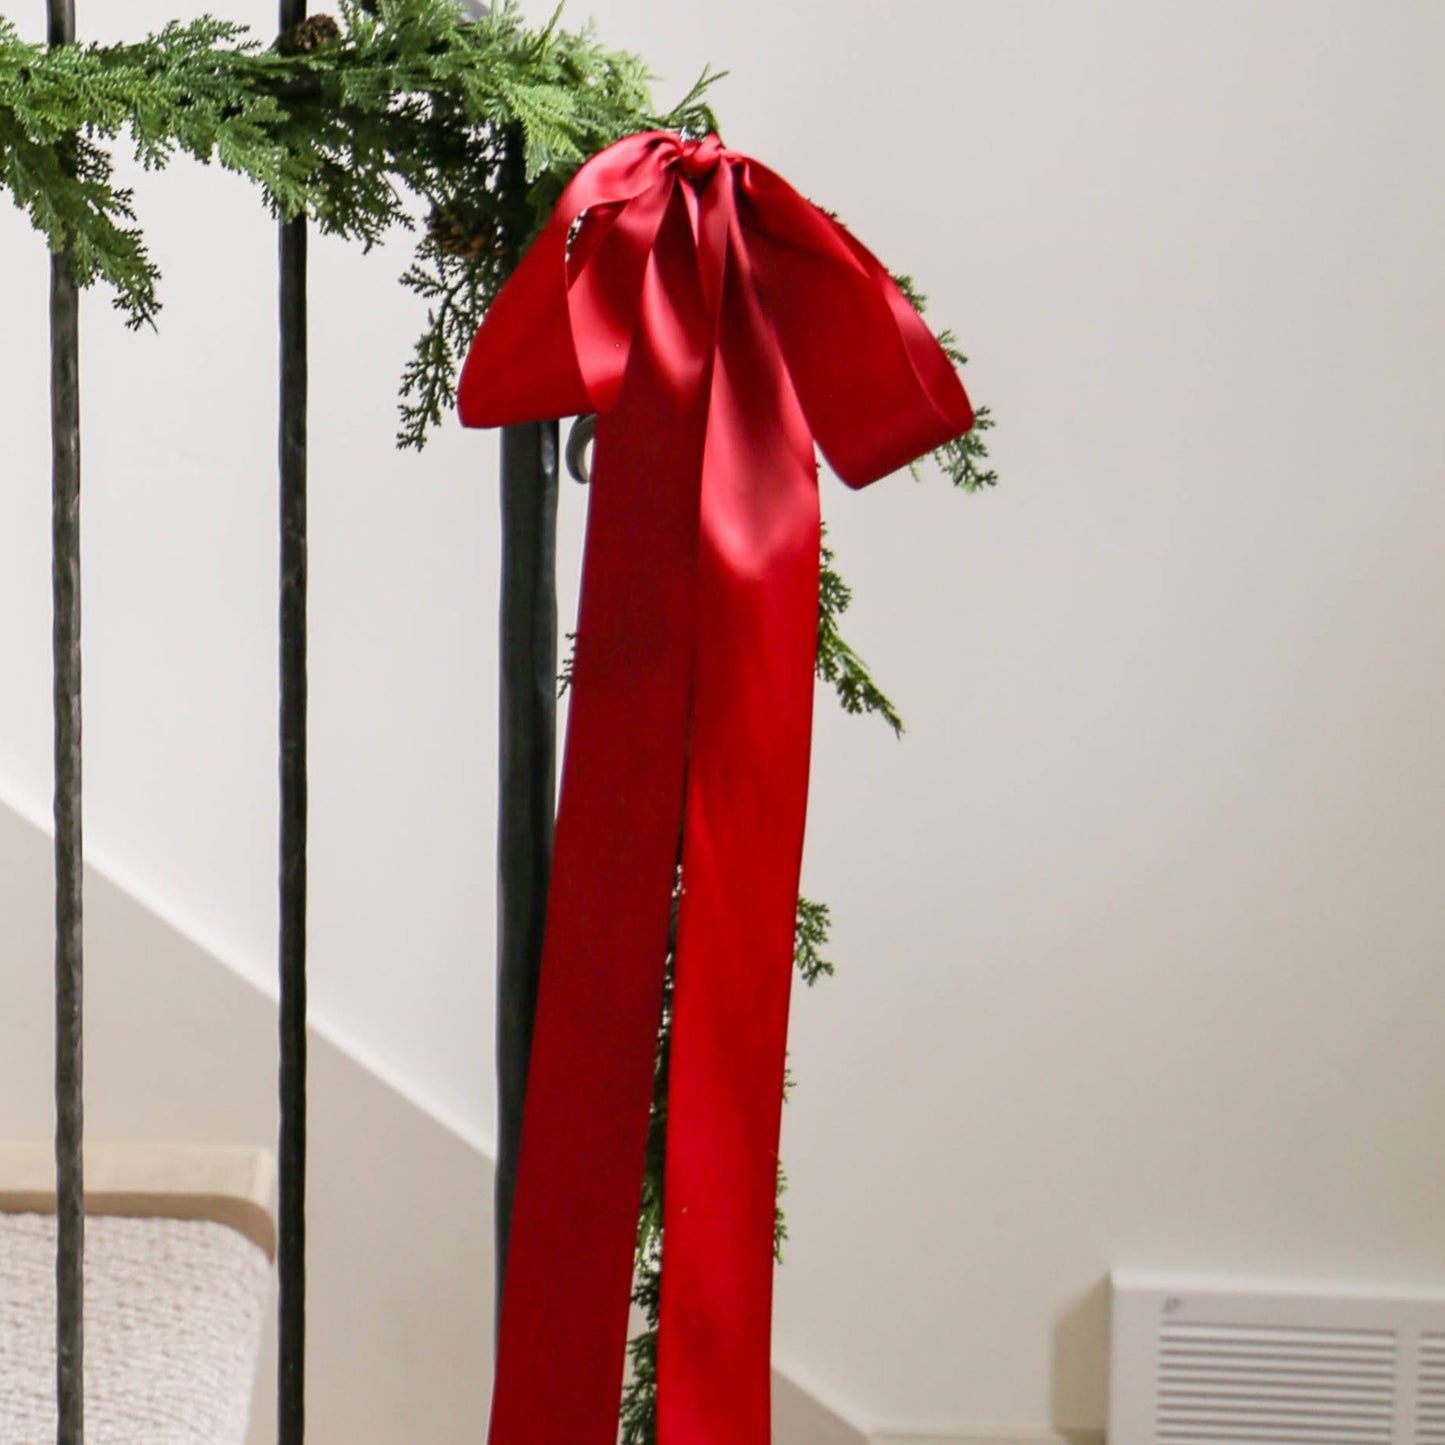 Cranberry BANISTER BOW™